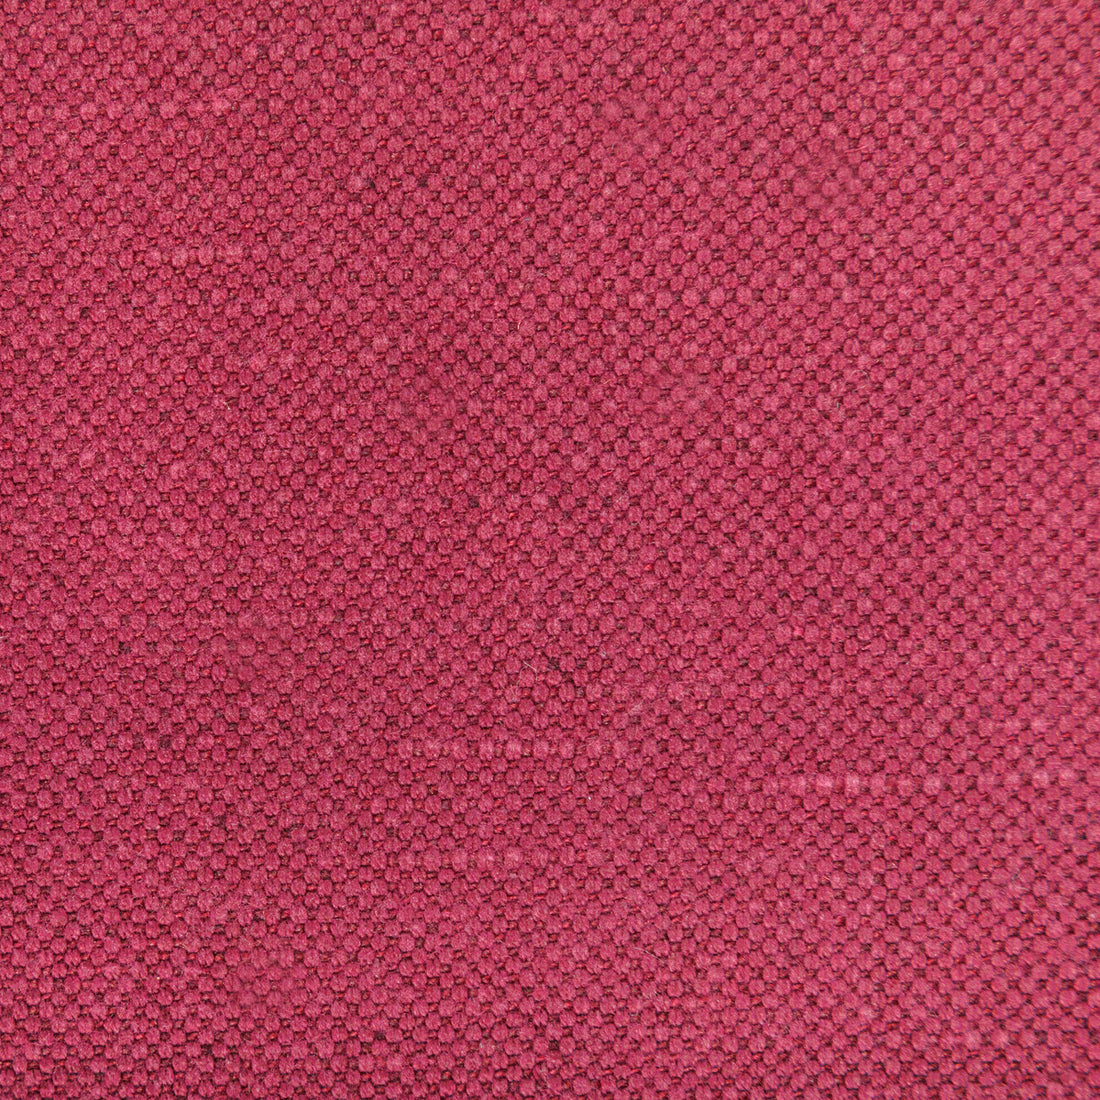 Carson fabric in fuchsia color - pattern 36282.9797.0 - by Kravet Basics